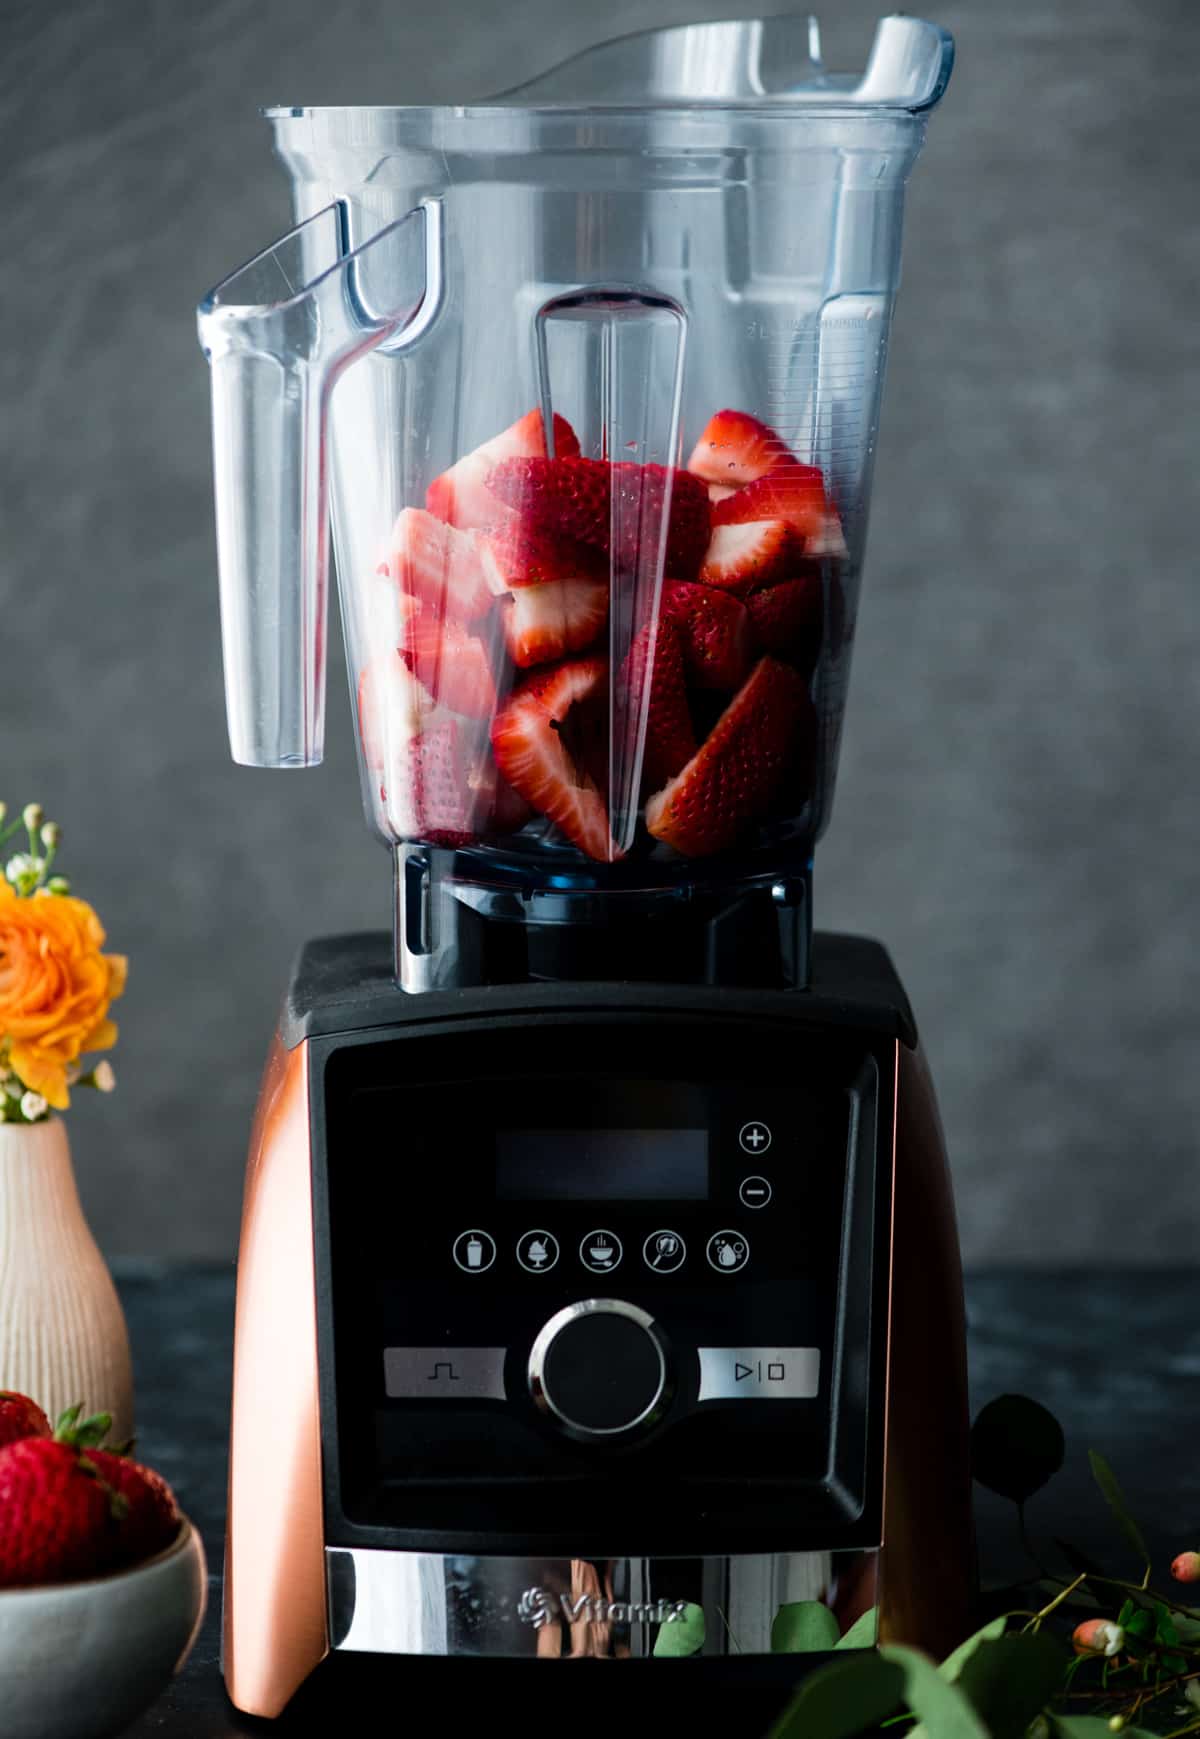 Front view of strawberries in a vitamix blender ready to be made into this Strawberry Sauce recipe